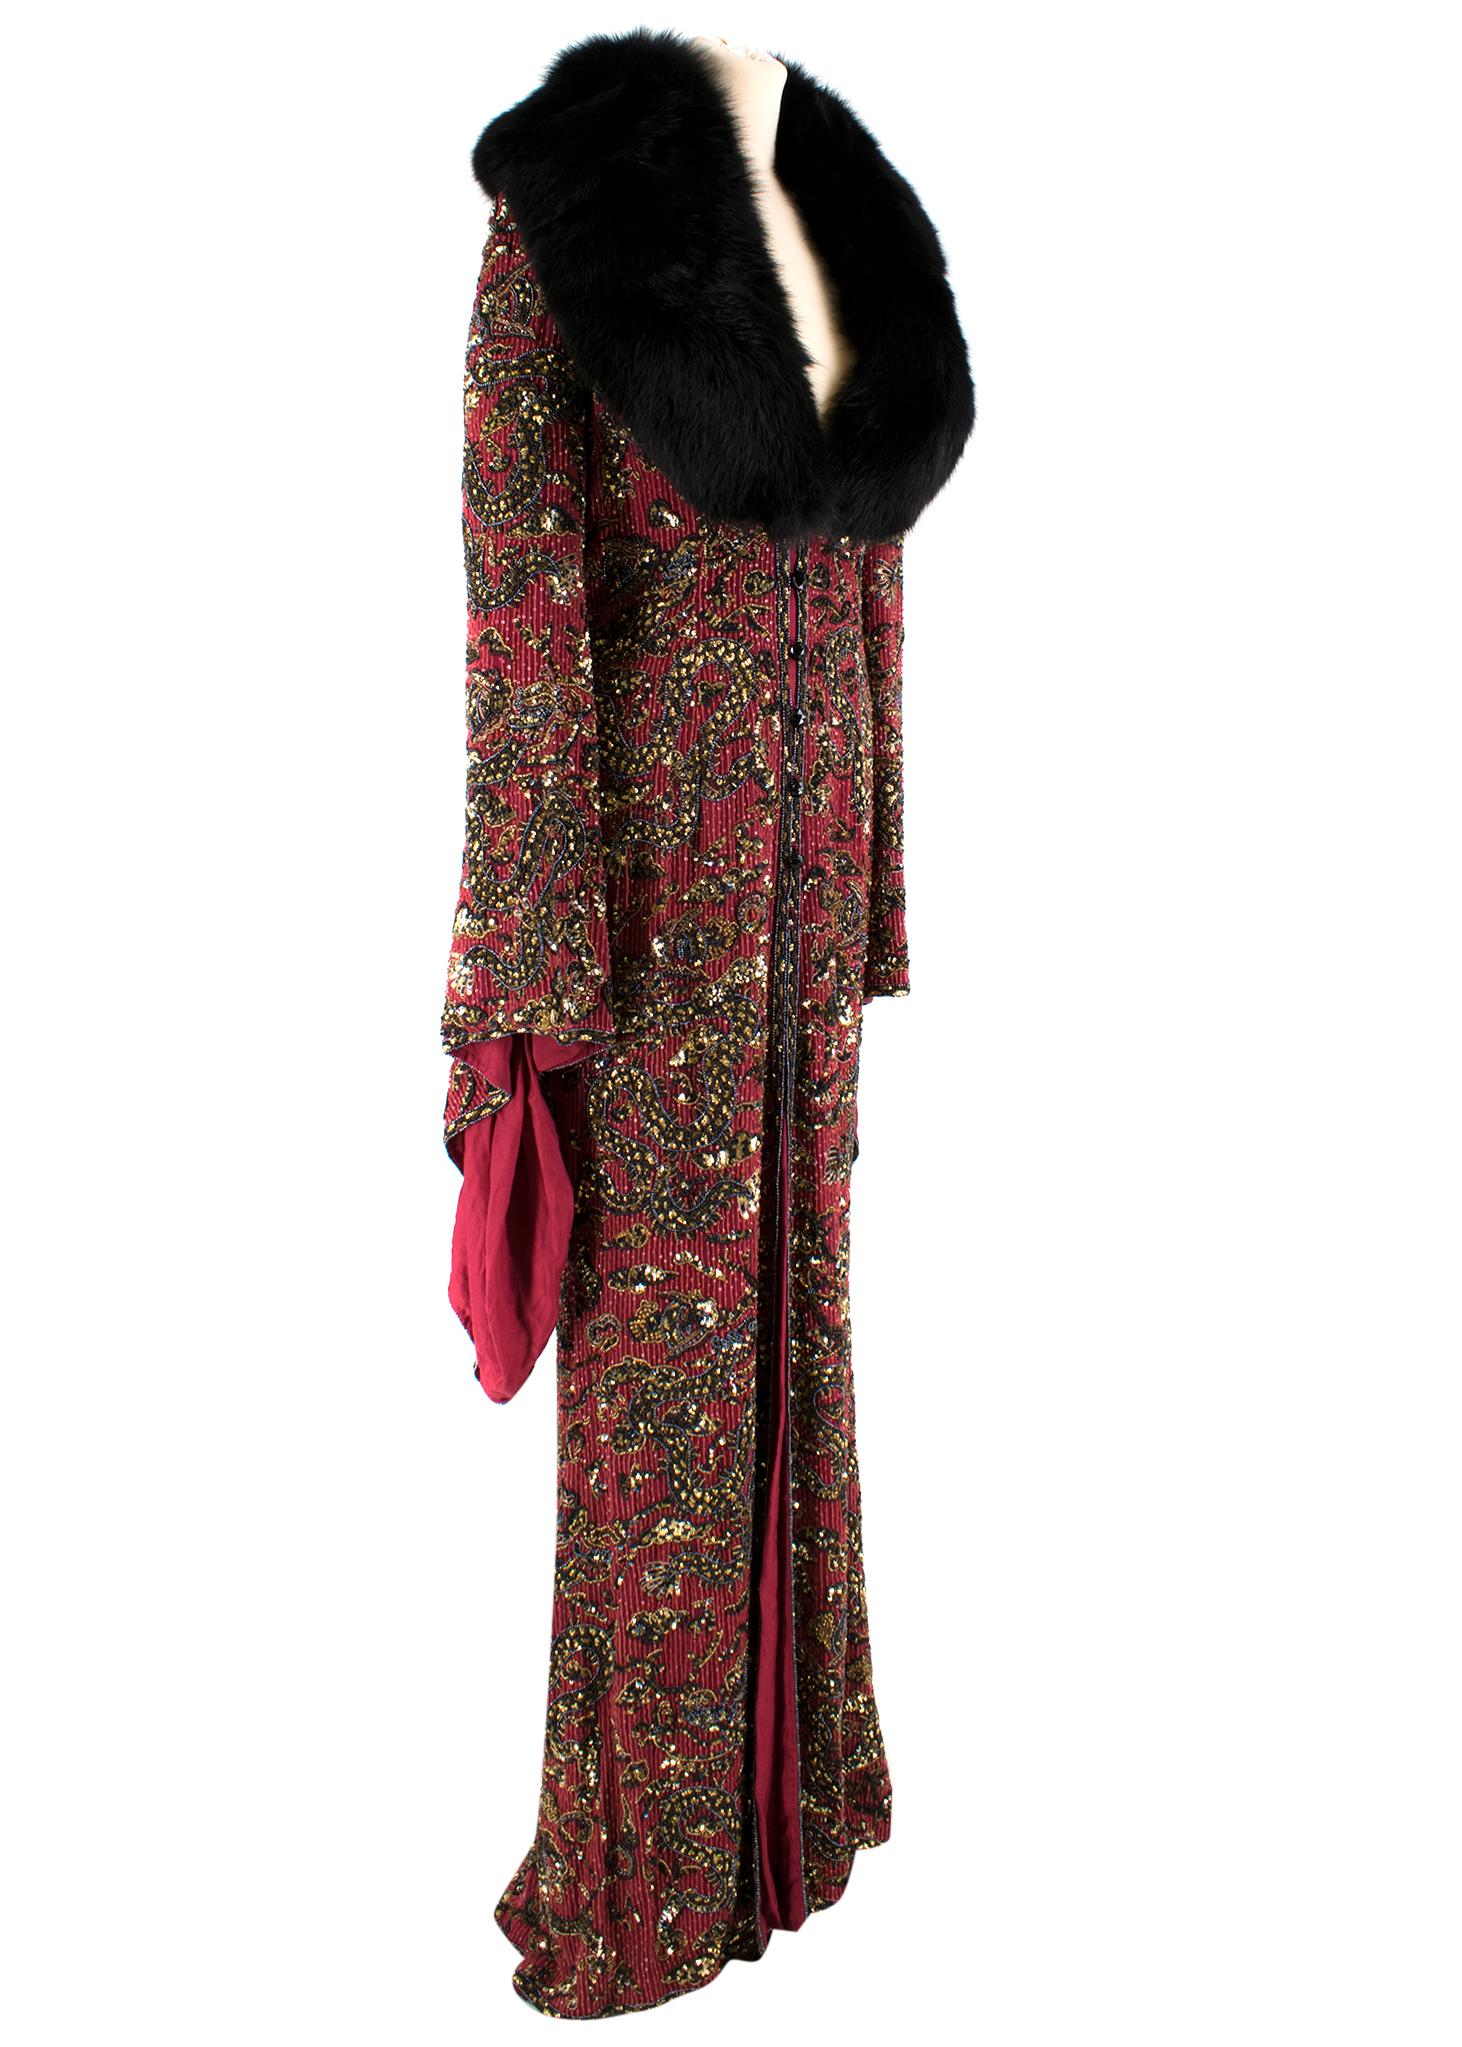 Escada Embellished Vintage Gown 

-Deep maroon-red heavyweight vintage silk gown.
-Gold-tone, black, red and gunmetal ornate bead embellished
- Detachable black fox fur collar
-Long oversized bell sleeves
- Centre-front half Rouleau button